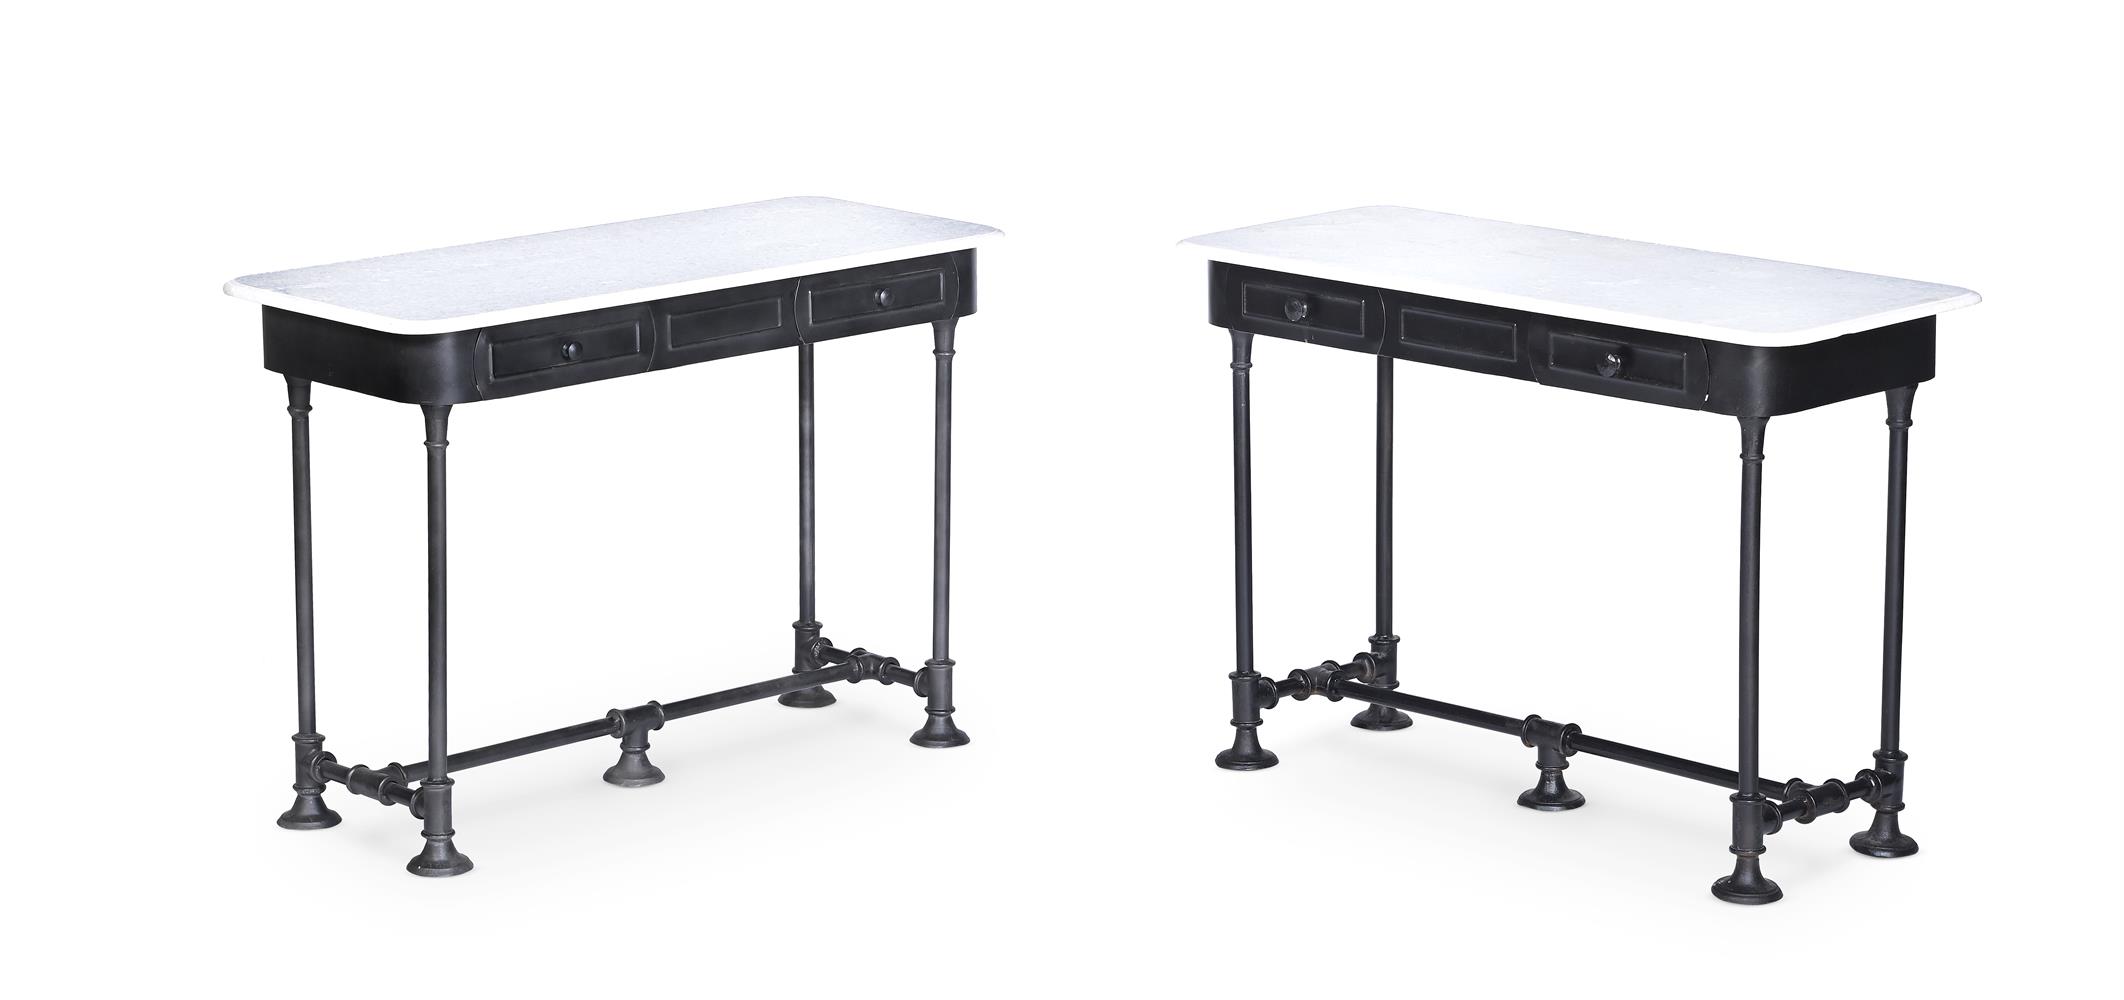 A PAIR OF BLACK PAINTED METAL AND MARBLE TOPPED SIDE TABLES, BY ANOUSKA HEMPEL